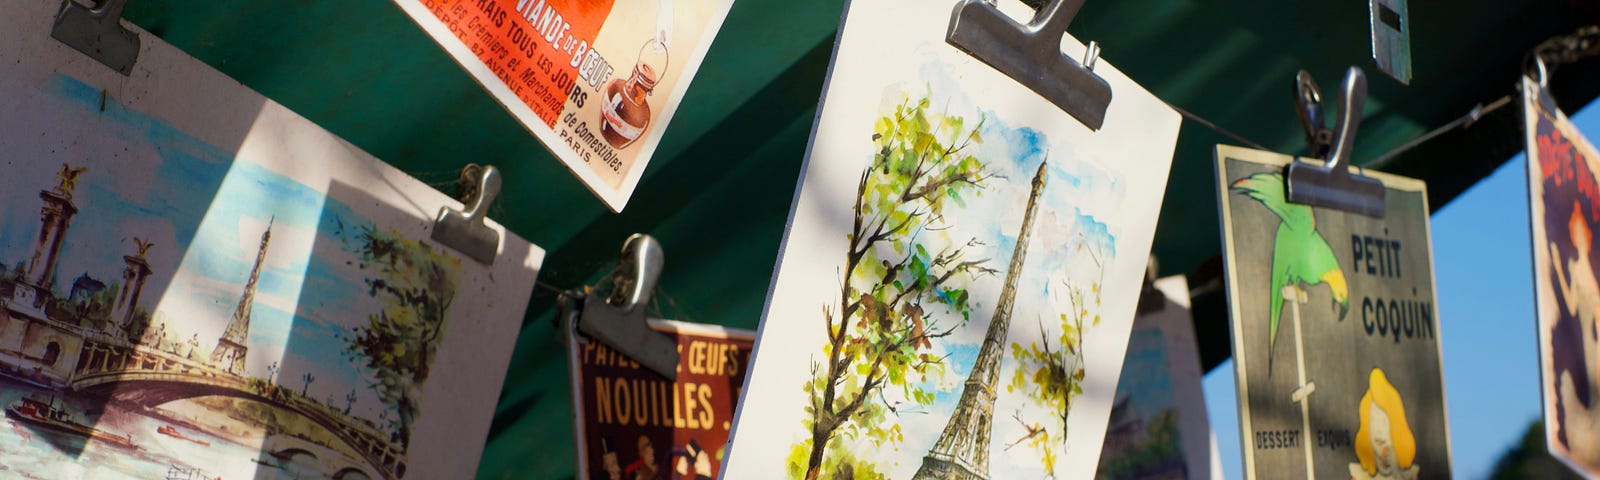 Postcards hanging from a clothesline. They show motifs from Paris.